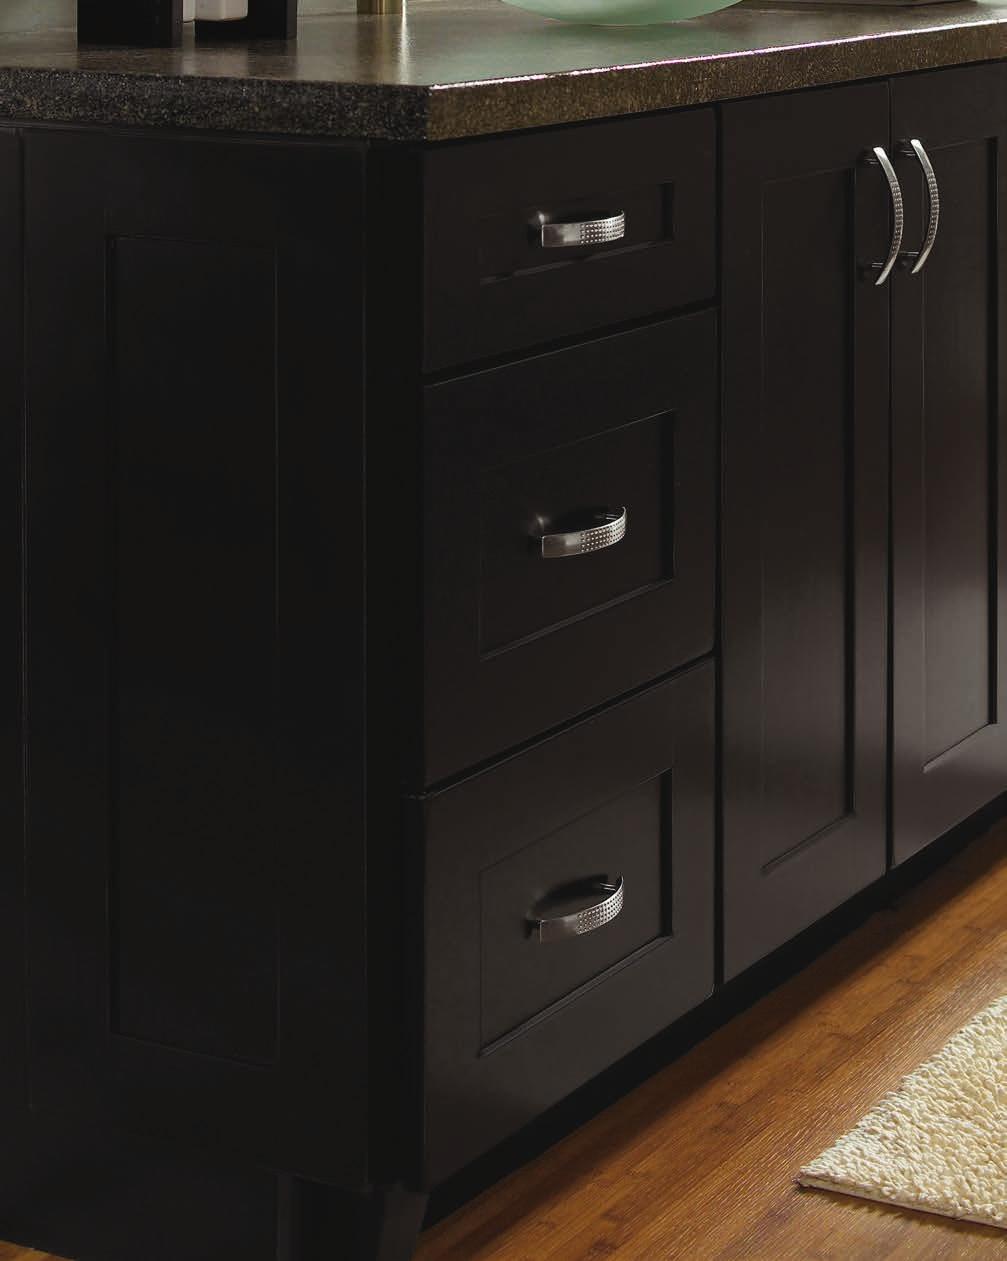 Cabinetry features doors with reverse raised center panels and solid slab drawer fronts.